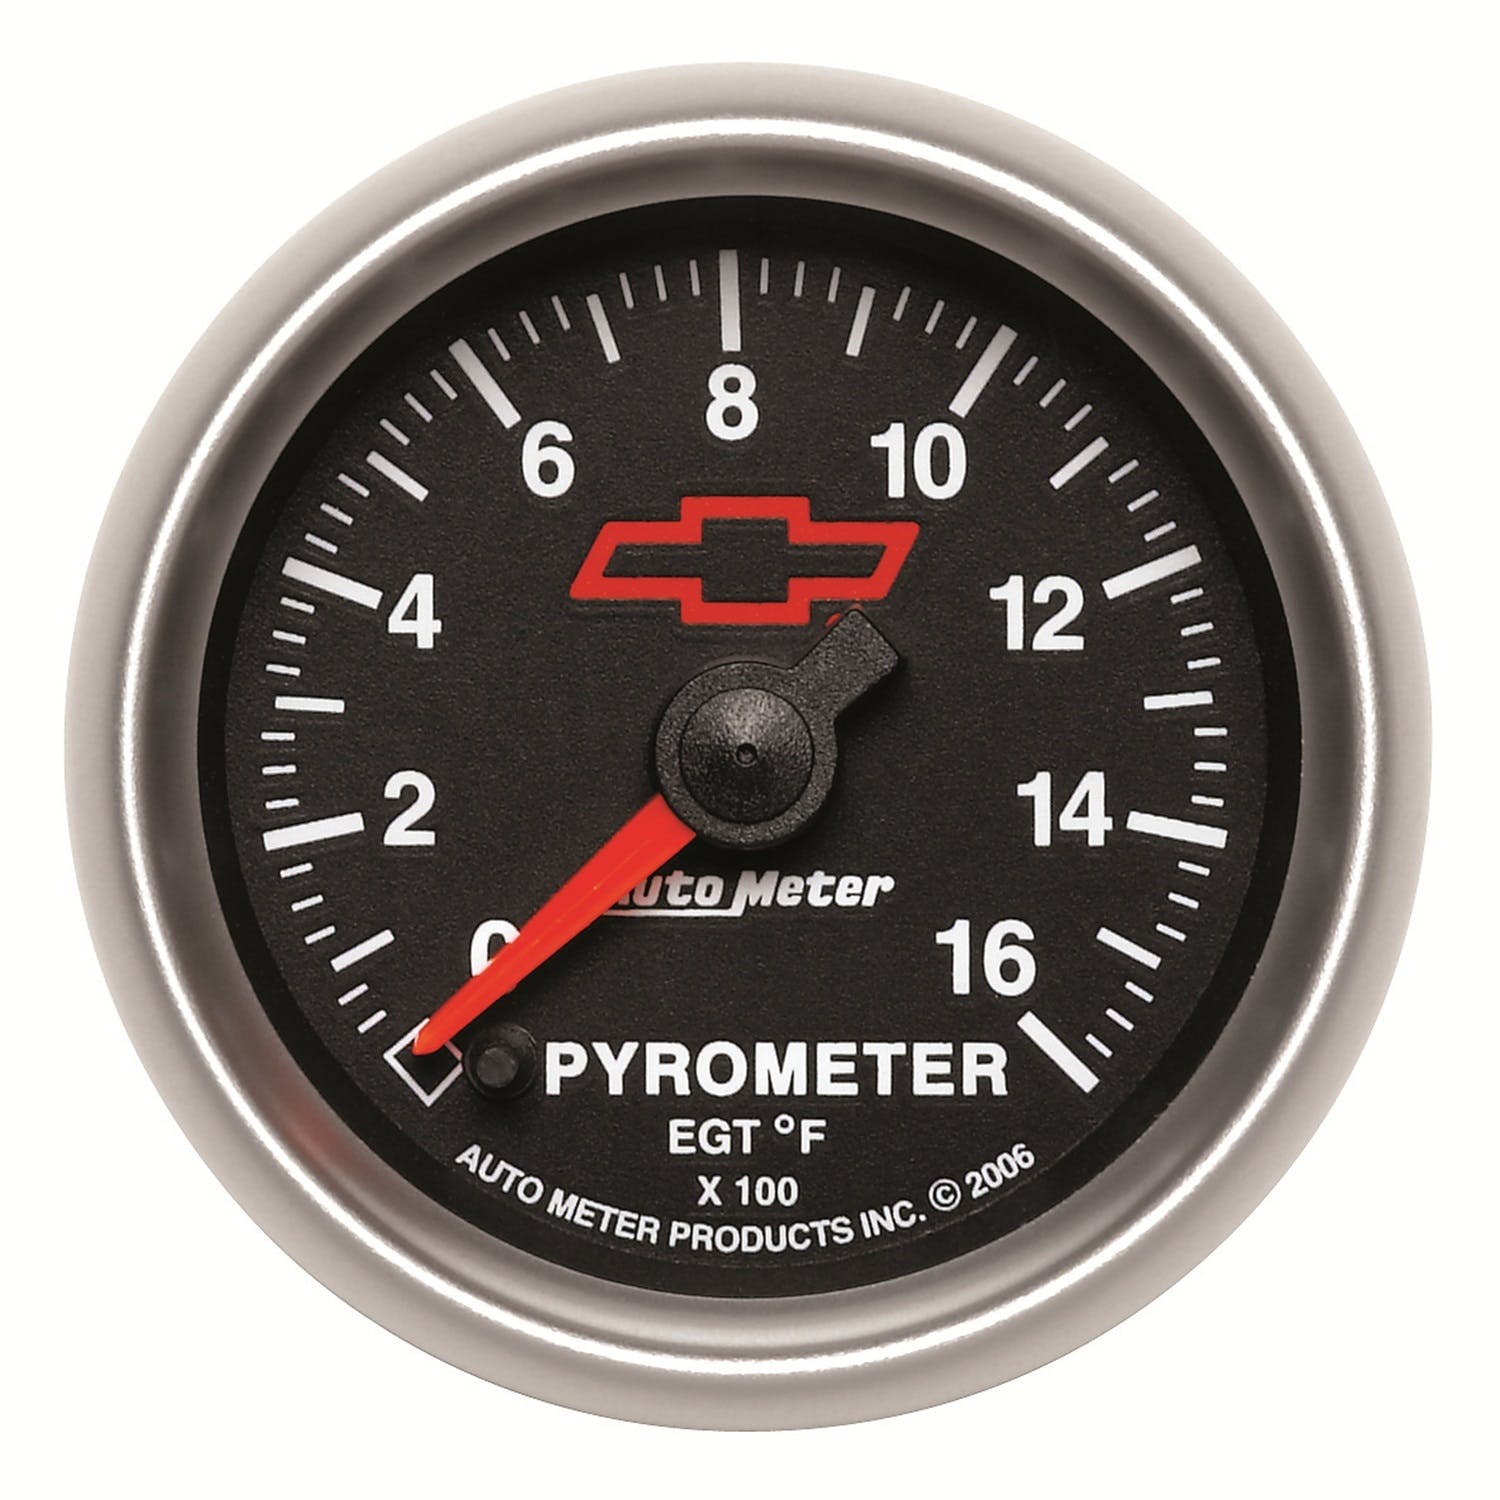 AutoMeter Products 3644-00406 2-1/16 Pyrometer Kit 0 1600 F Full Swp Elec, GM Red Bowtie